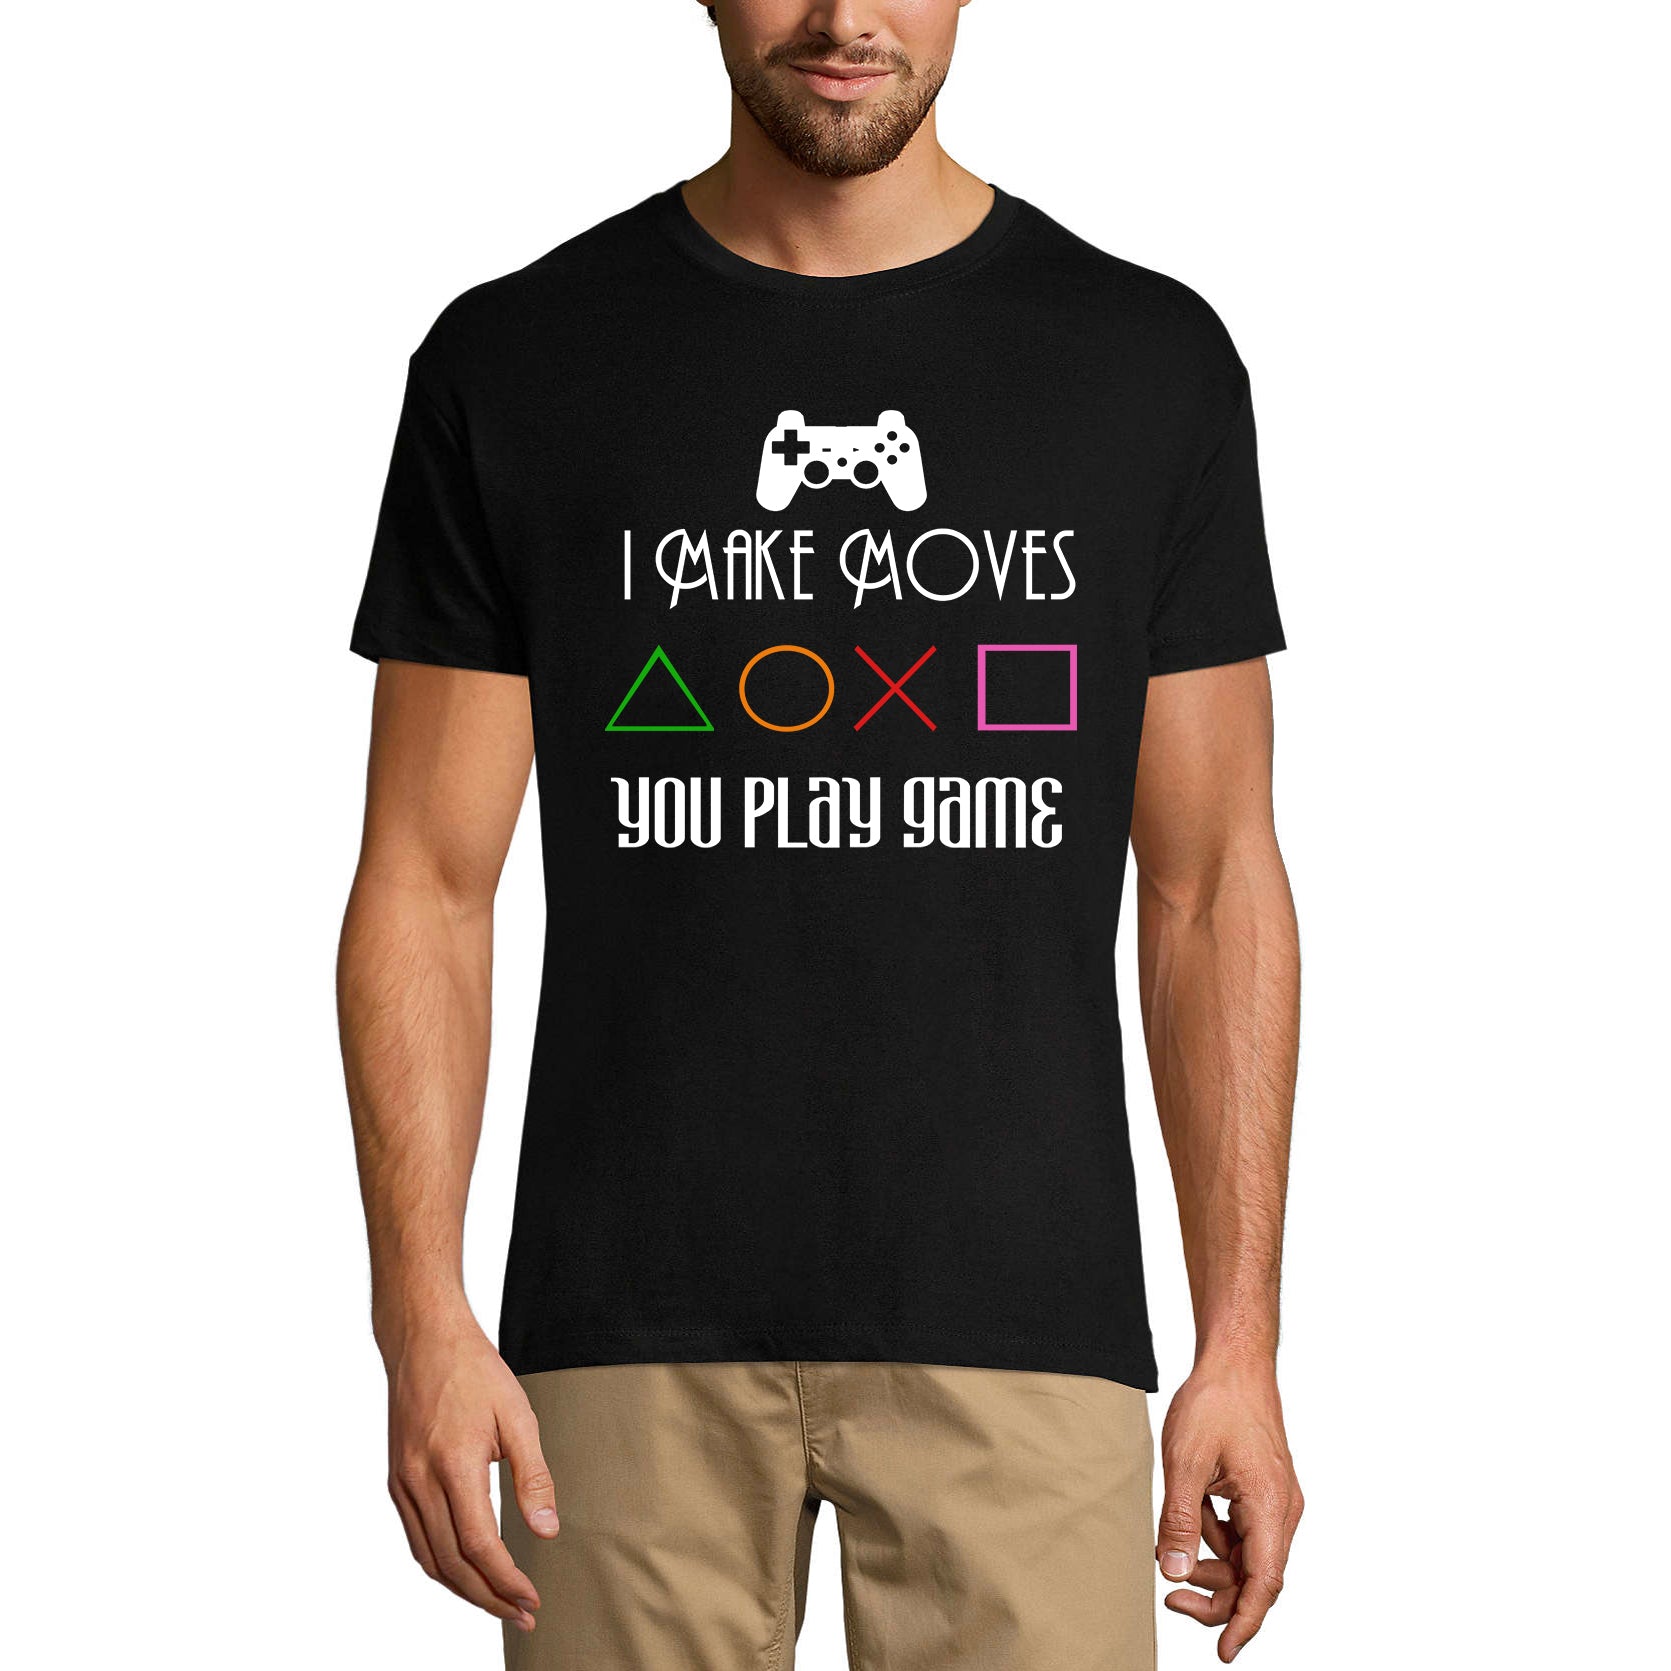 ULTRABASIC Men's T-Shirt I Make Moves You Play Game - Gaming Shirt for Player mode on level up dad gamer i paused my game alien player ufo playstation tee shirt clothes gaming apparel gifts super mario nintendo call of duty graphic tshirt video game funny geek gift for the gamer fortnite pubg humor son father birthday